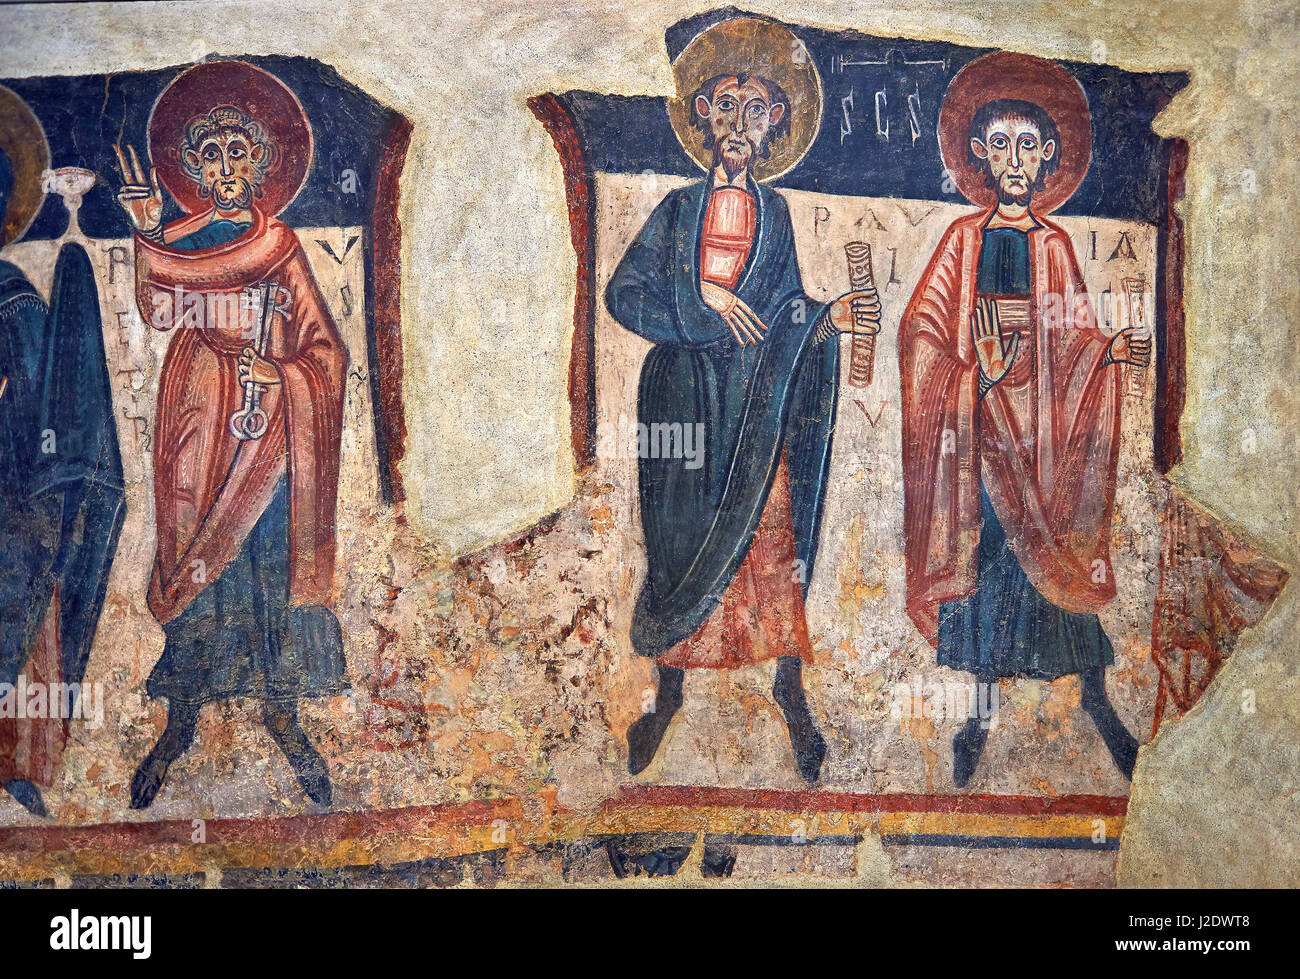 Romanesque frescoes of the Apostles from the church of Sant Roma de les Bons, painted around 1164, Encamp, Andorra. National Art Museum of Catalonia,  Stock Photo